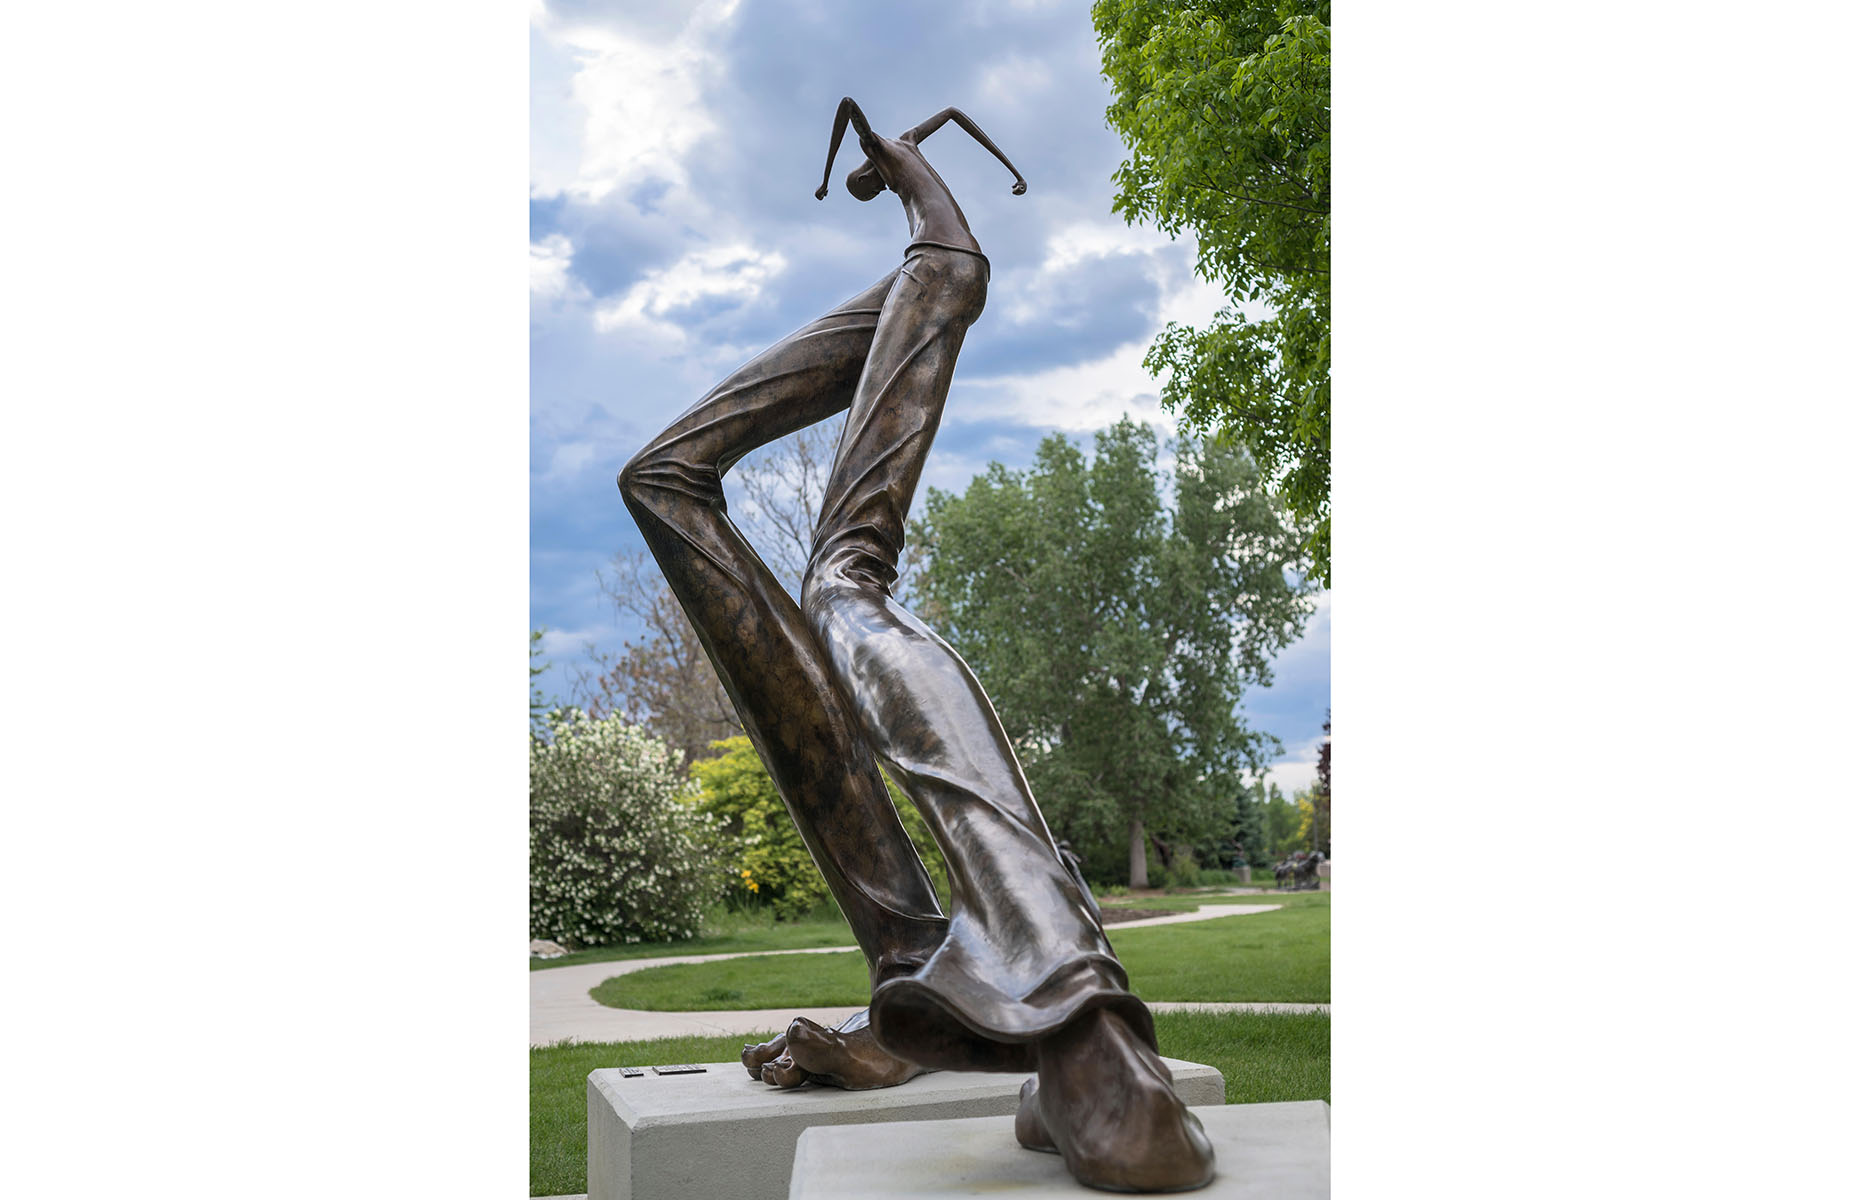 Monument in Right Feet Major (Image: Norman Wharton/Alamy)